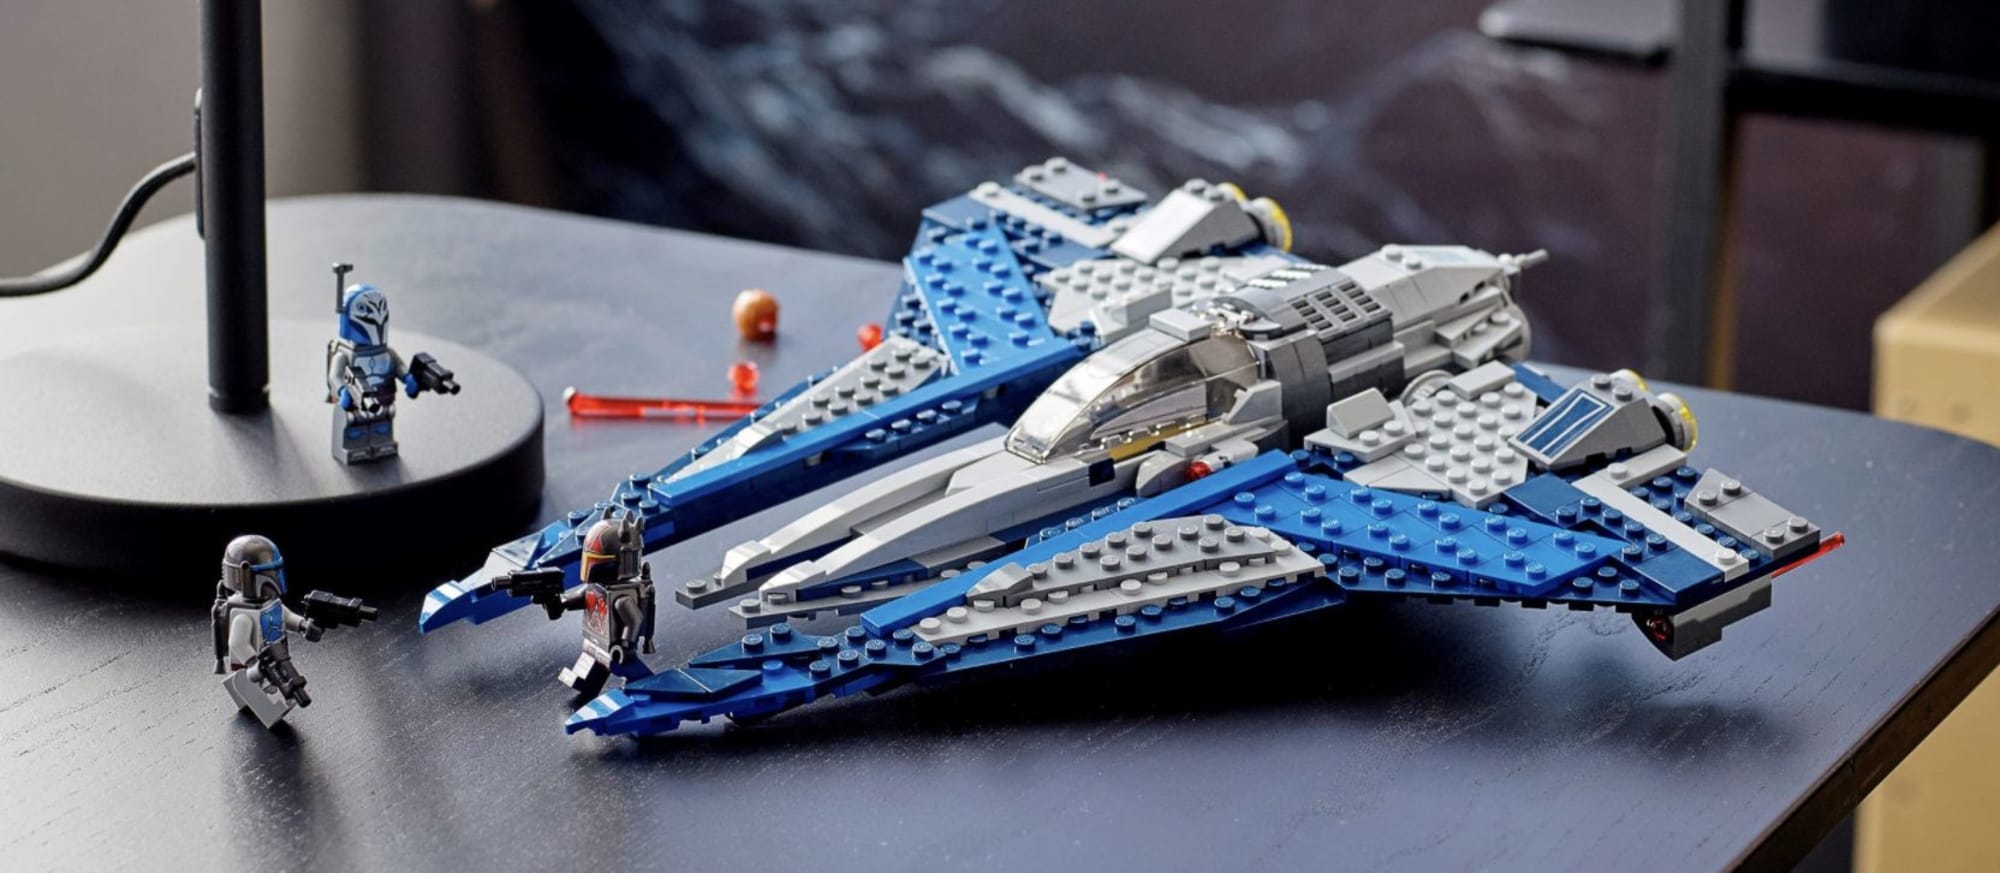 Lego Has Just Released 8 New Star Wars Themed Sets